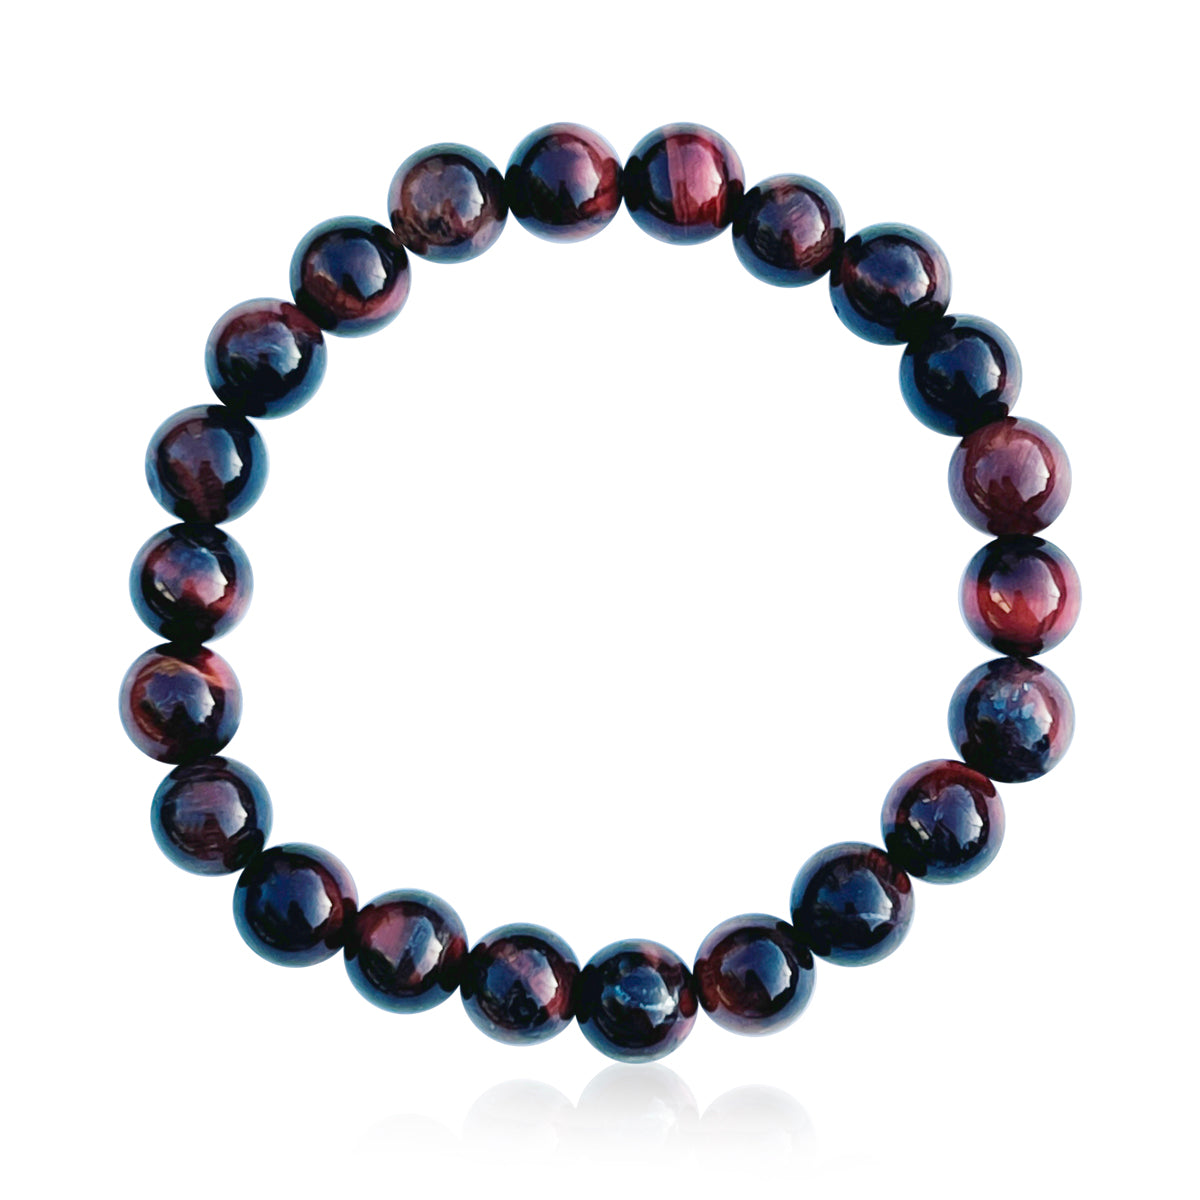 This Healing for Humanity Bracelet encourages us to giving back to our community through the healing properties of Red Tiger's Eye gemstone, which promotes balance, strength, and practical decision-making, providing individuals with the clarity and vision to make positive contributions to society.